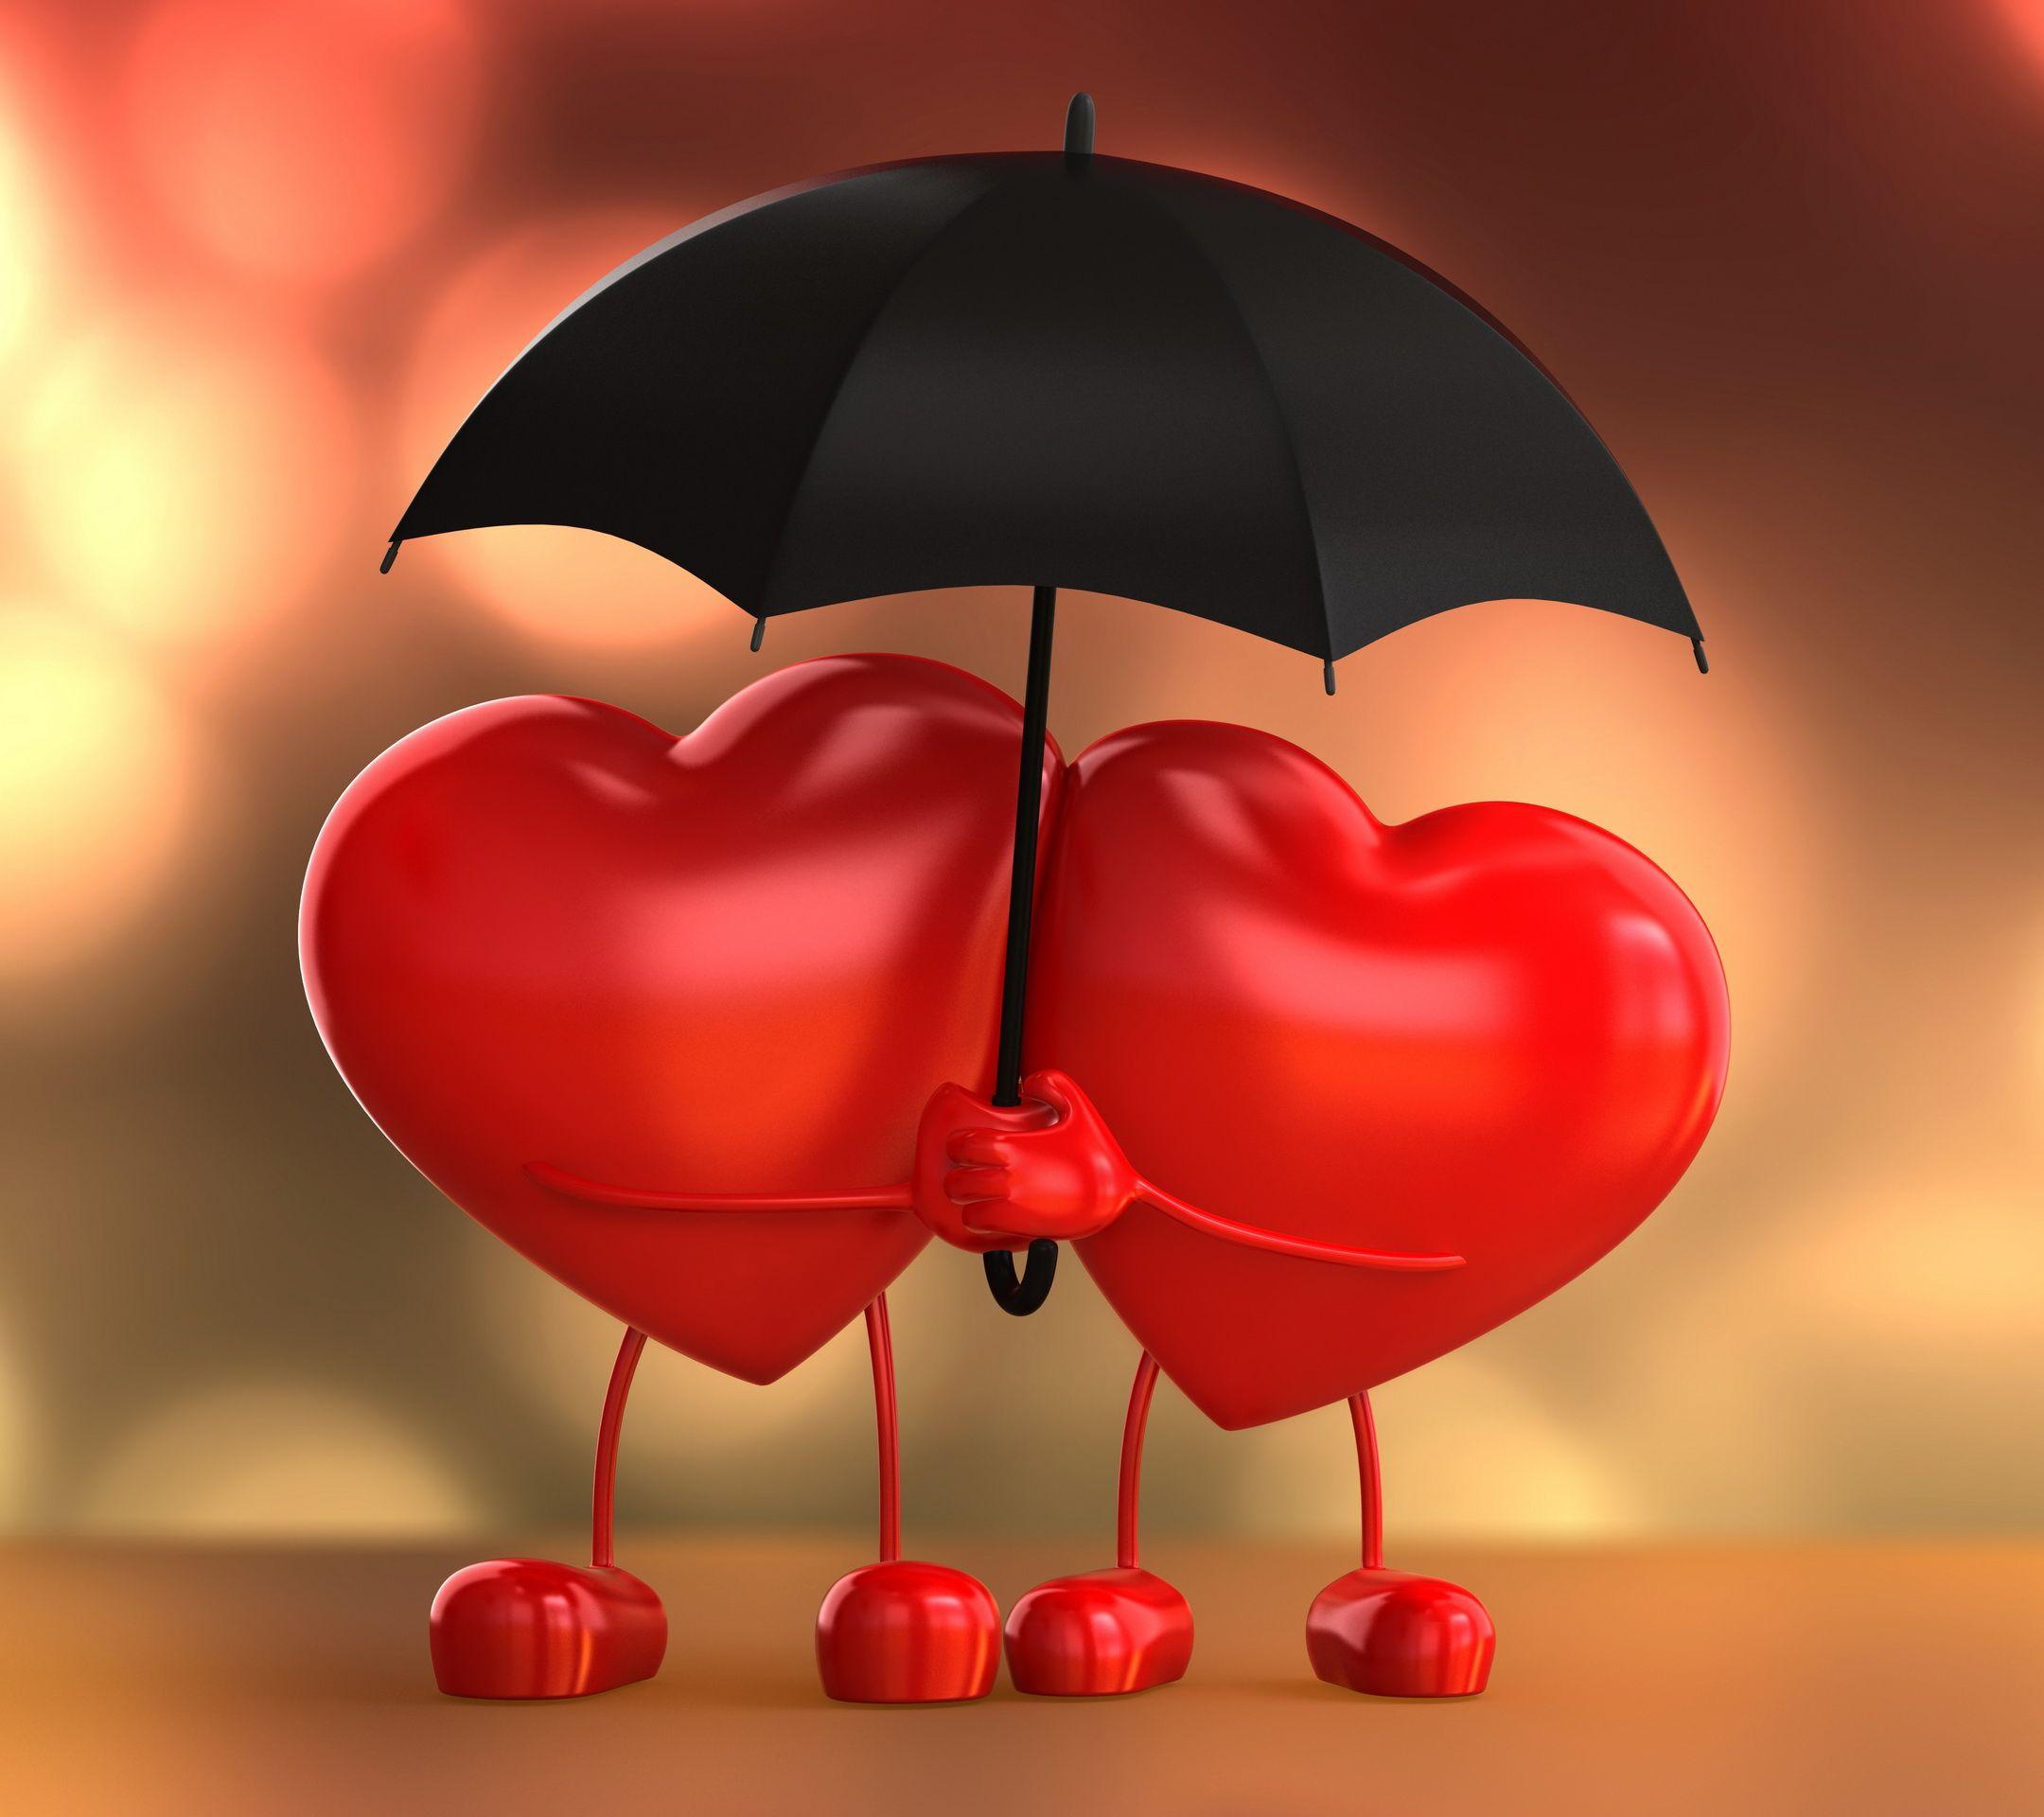 Love Couple Android Wallpaper. #couples #heart